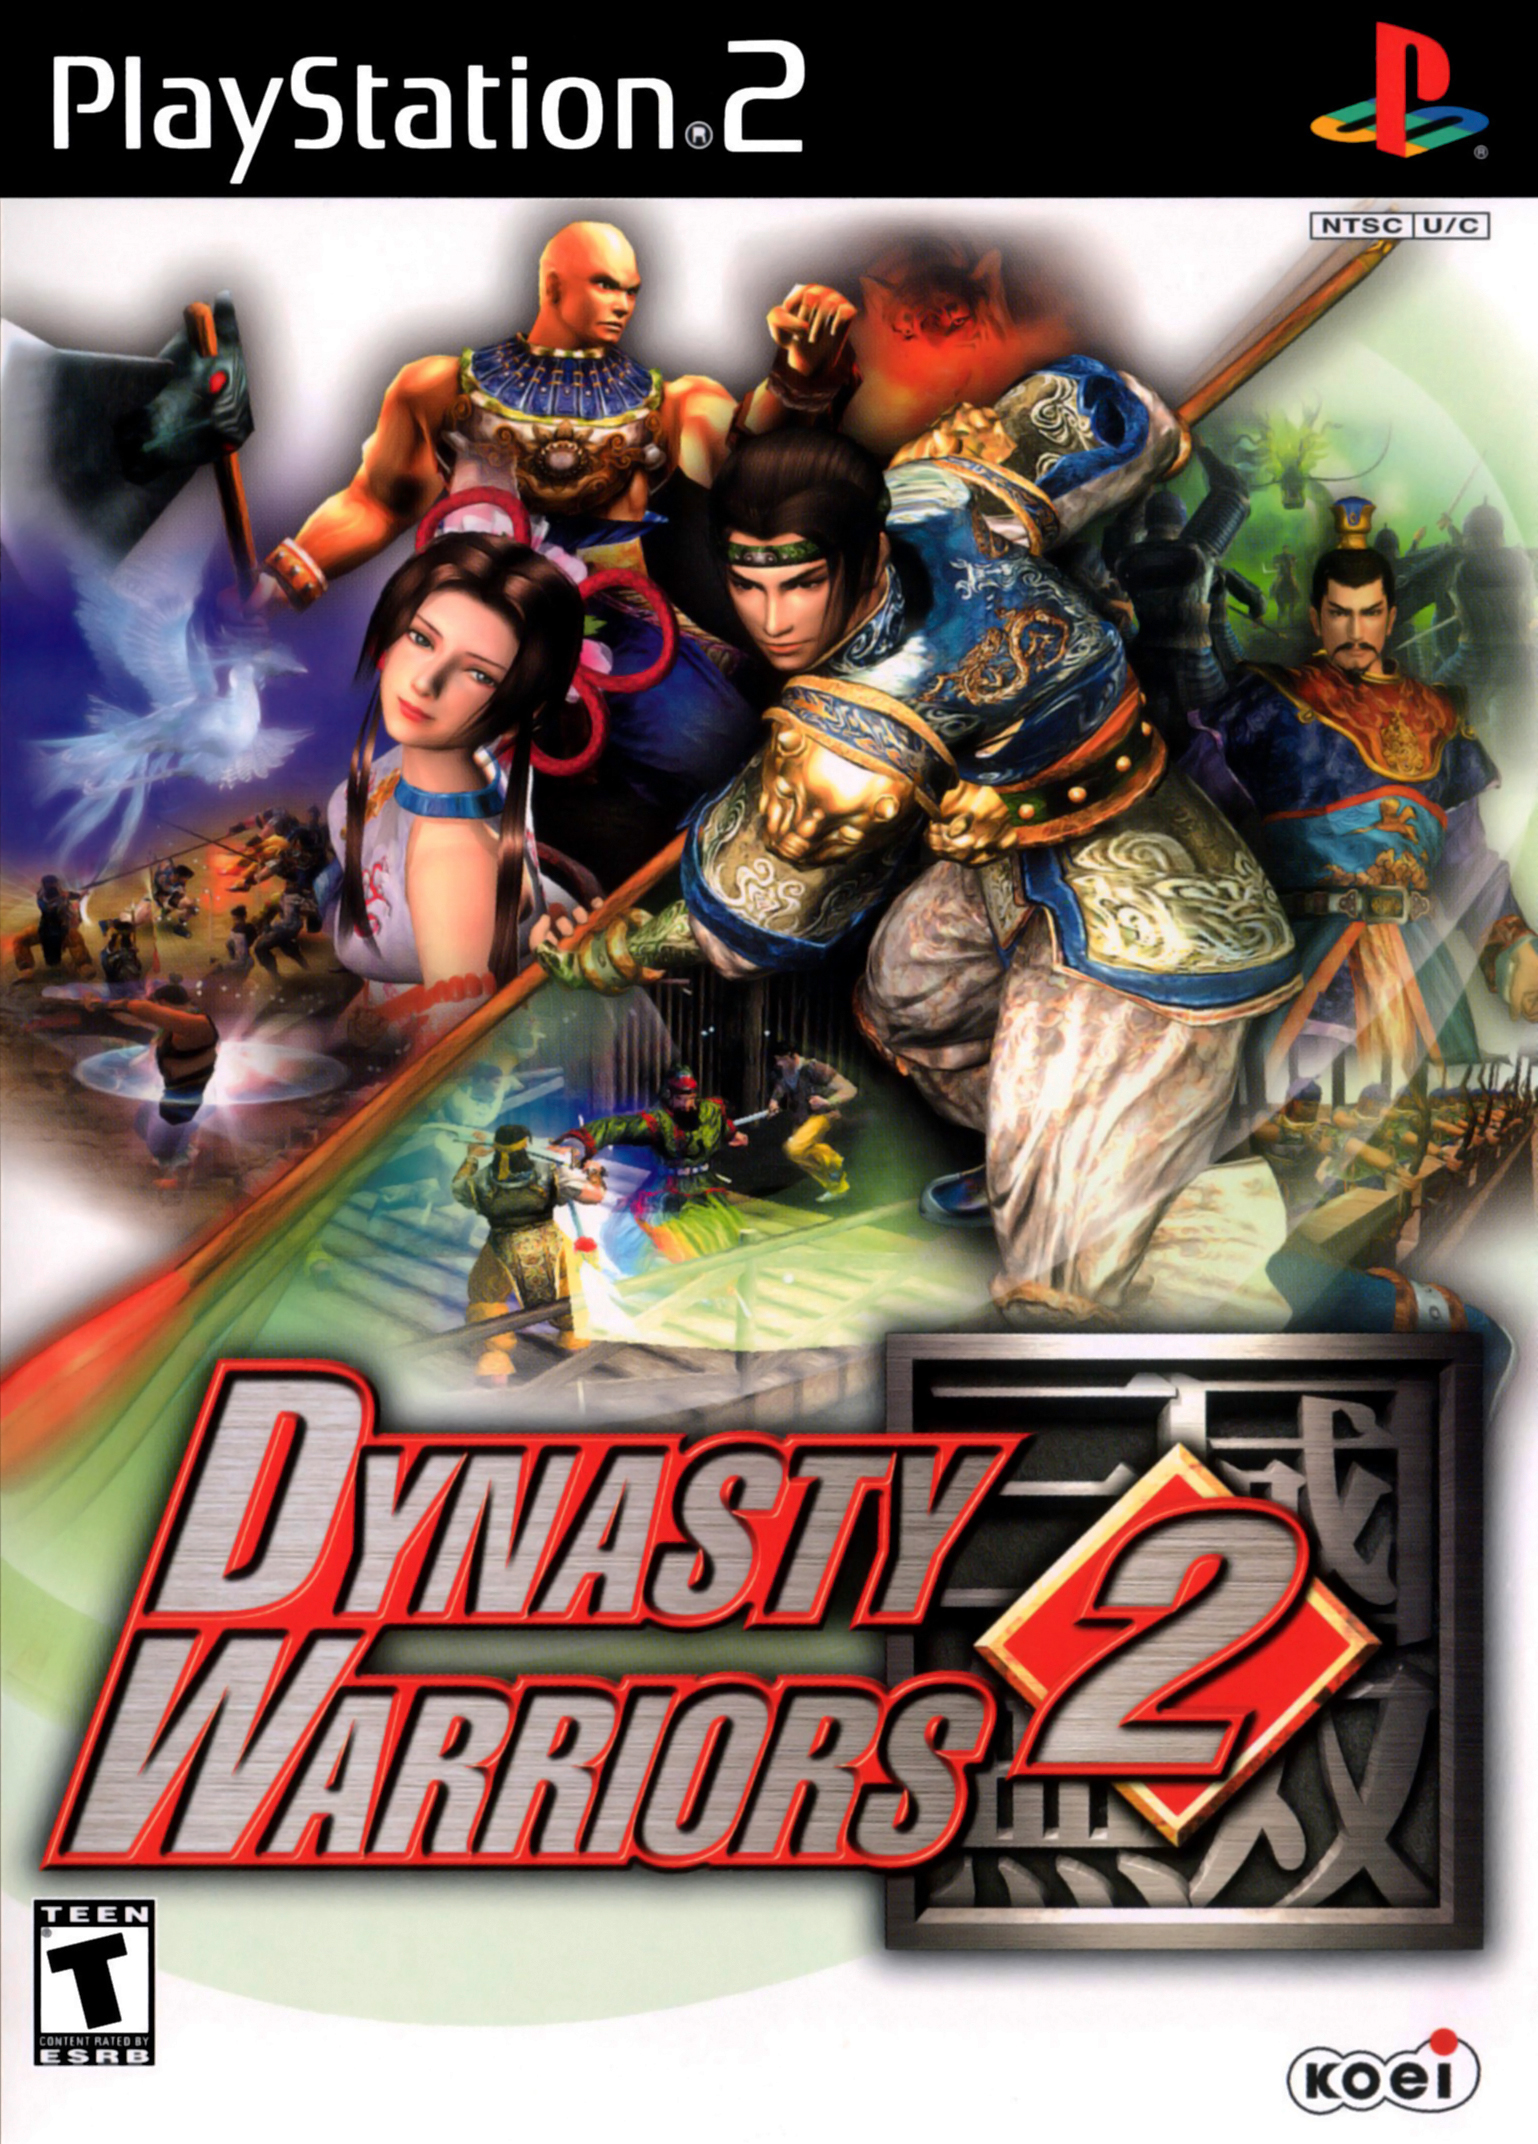 You Know What I'm Talking About Dynasty Warriors Fans.